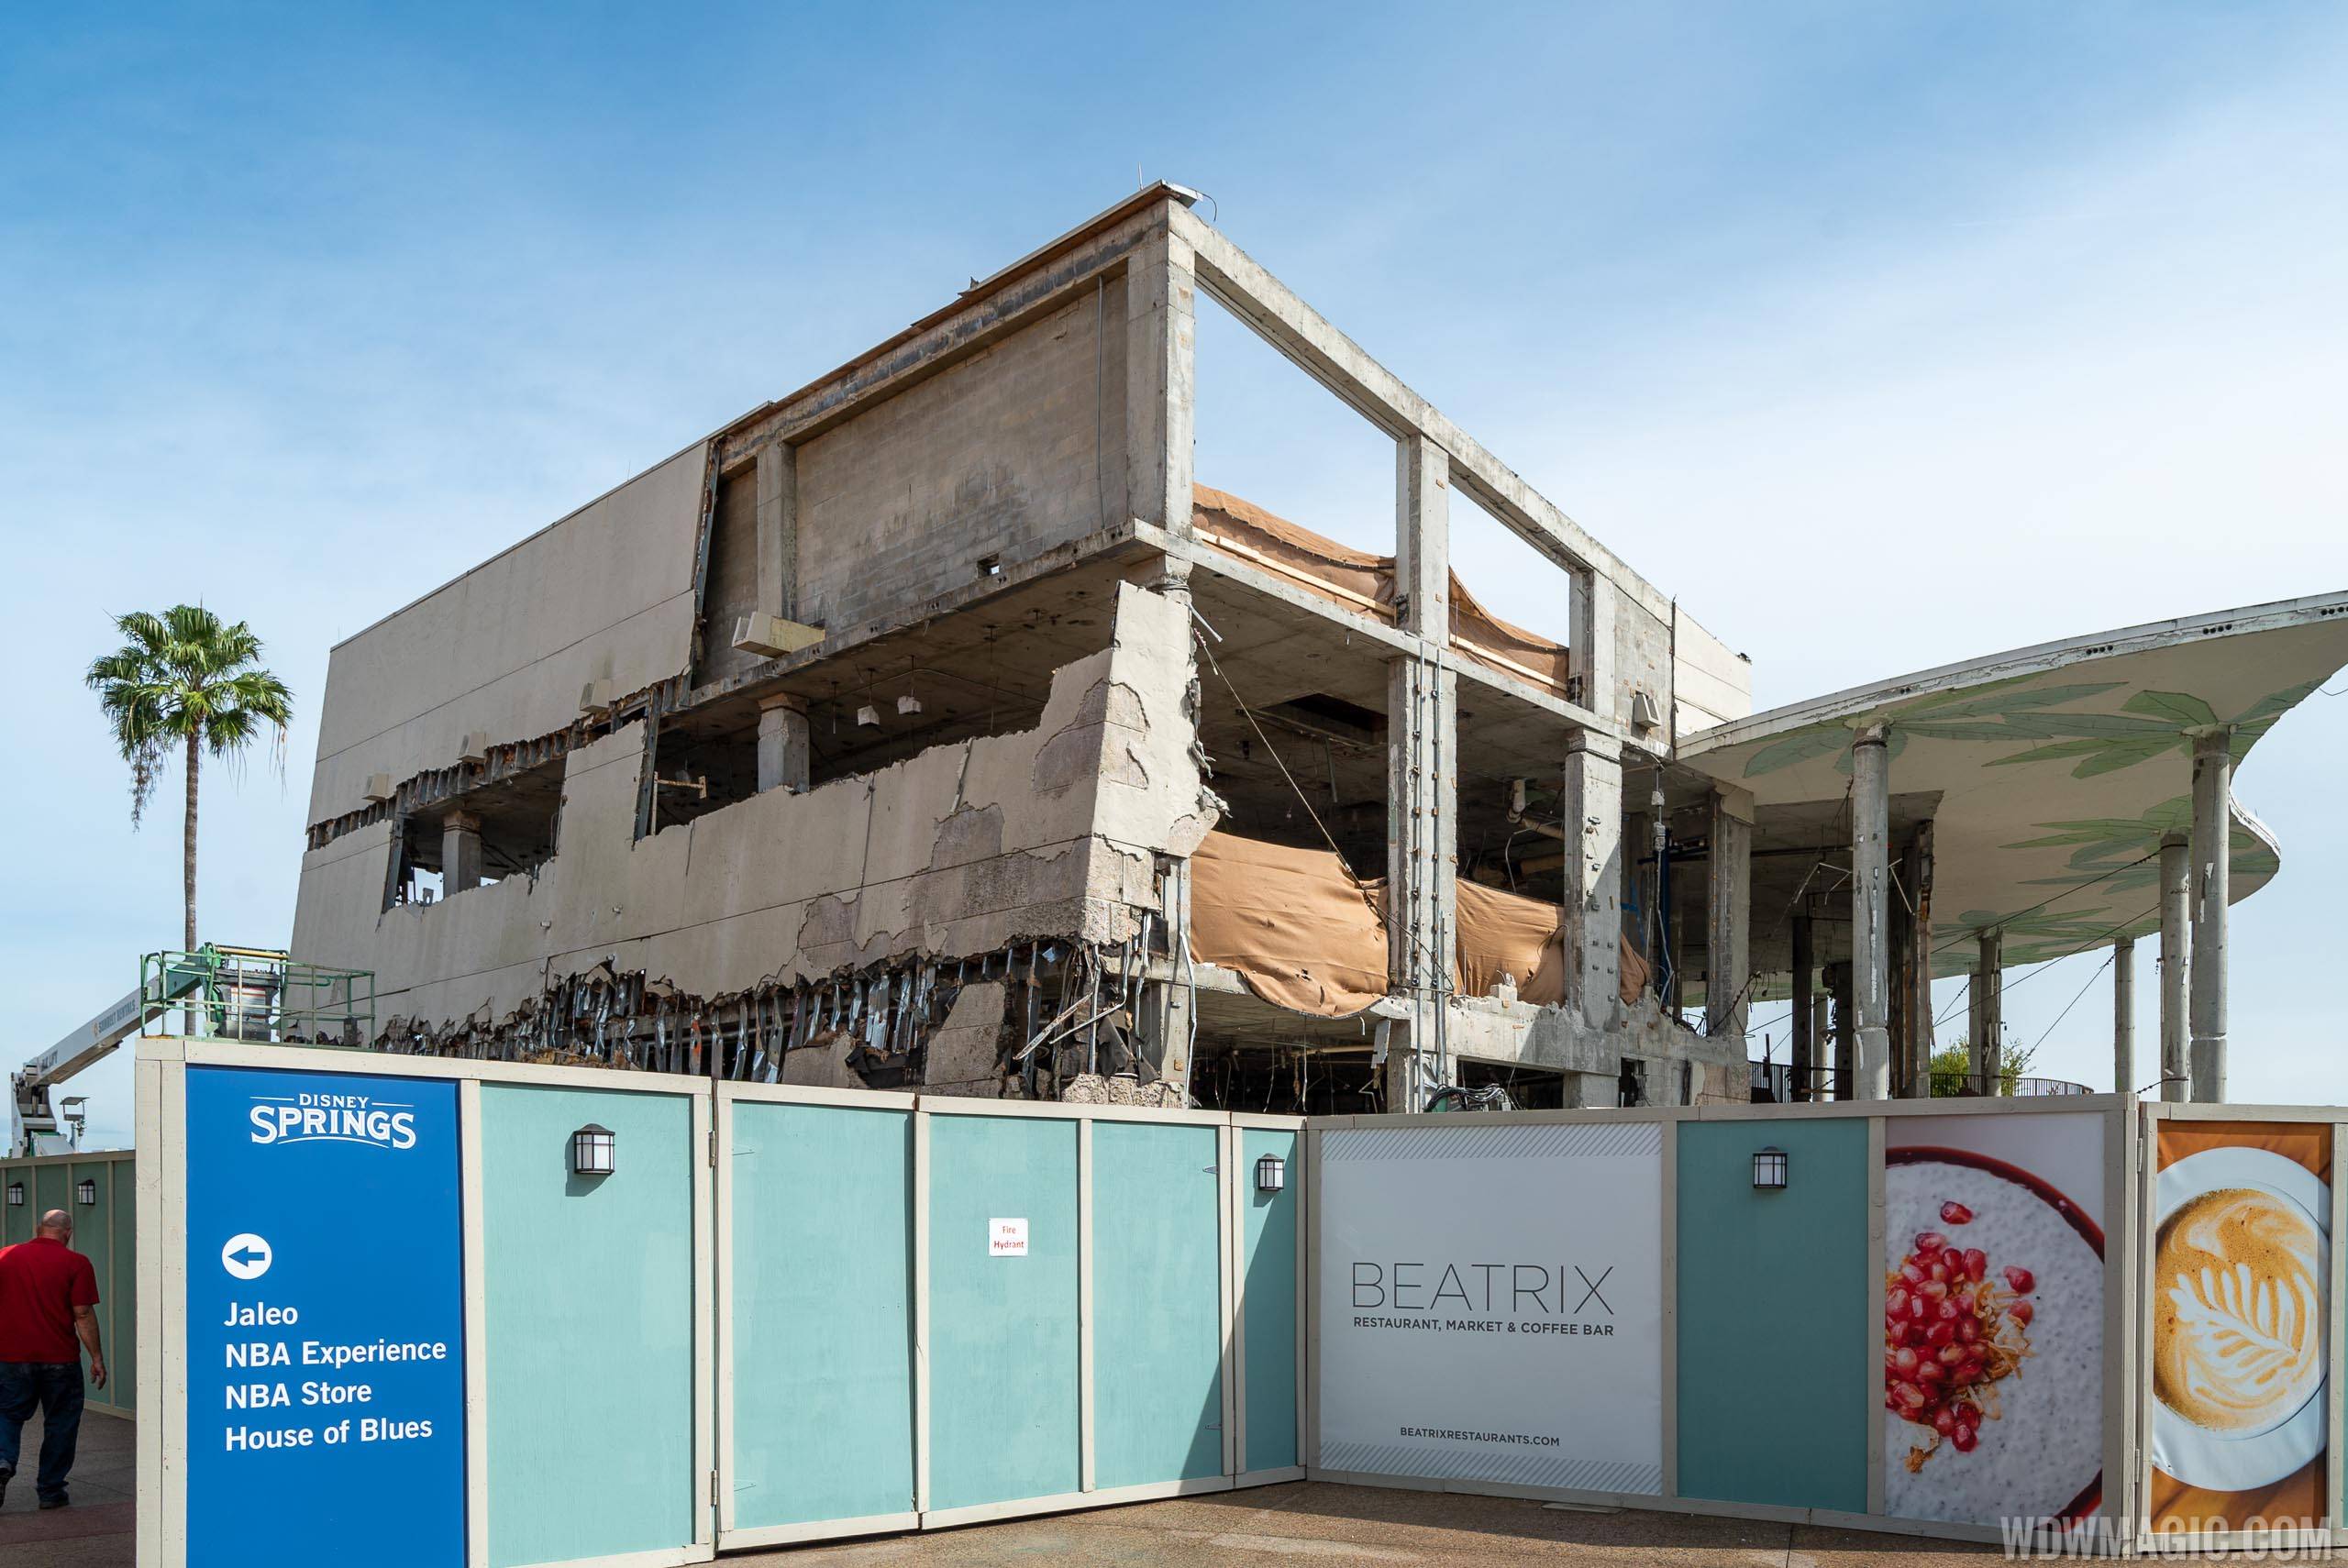 PHOTOS - Demolition of former Bongo's building at Disney Springs picks up pace